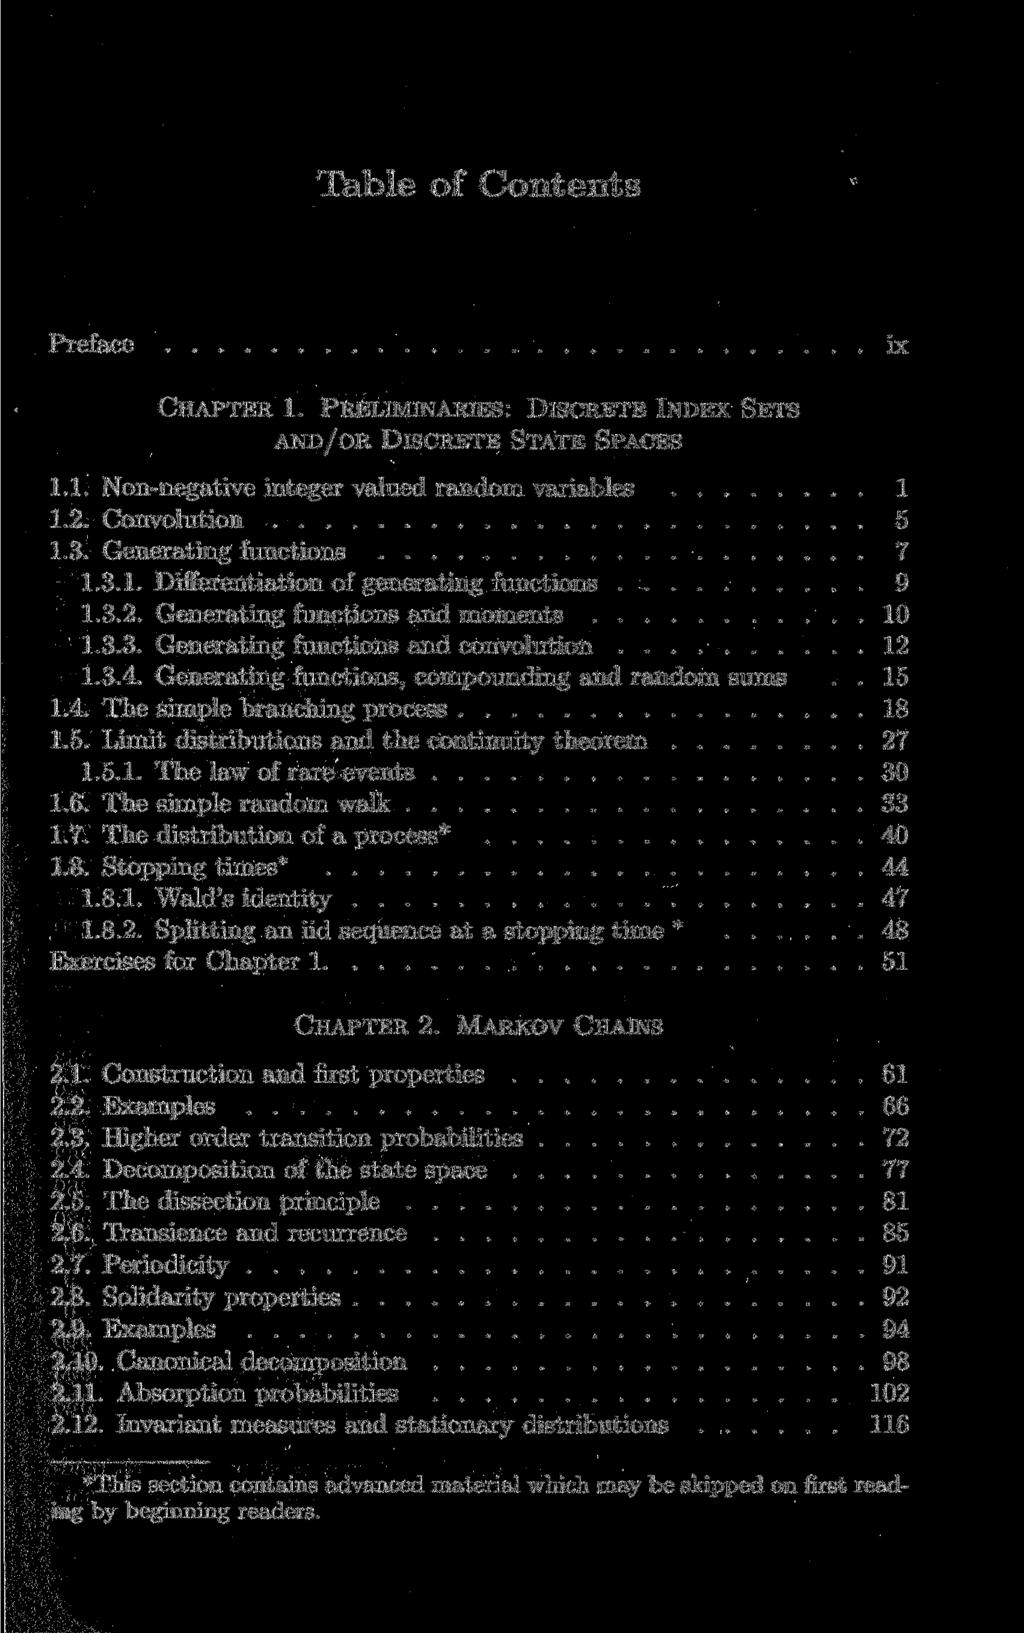 Table of Contents Preface ix CHAPTER 1. PRELIMINARIES: DISCRETE INDEX SETS AND/OR DISCRETE STATE SPACES 1.1. Non-negative integer valued random variables 1 1.2. Convolution 5 1.3.